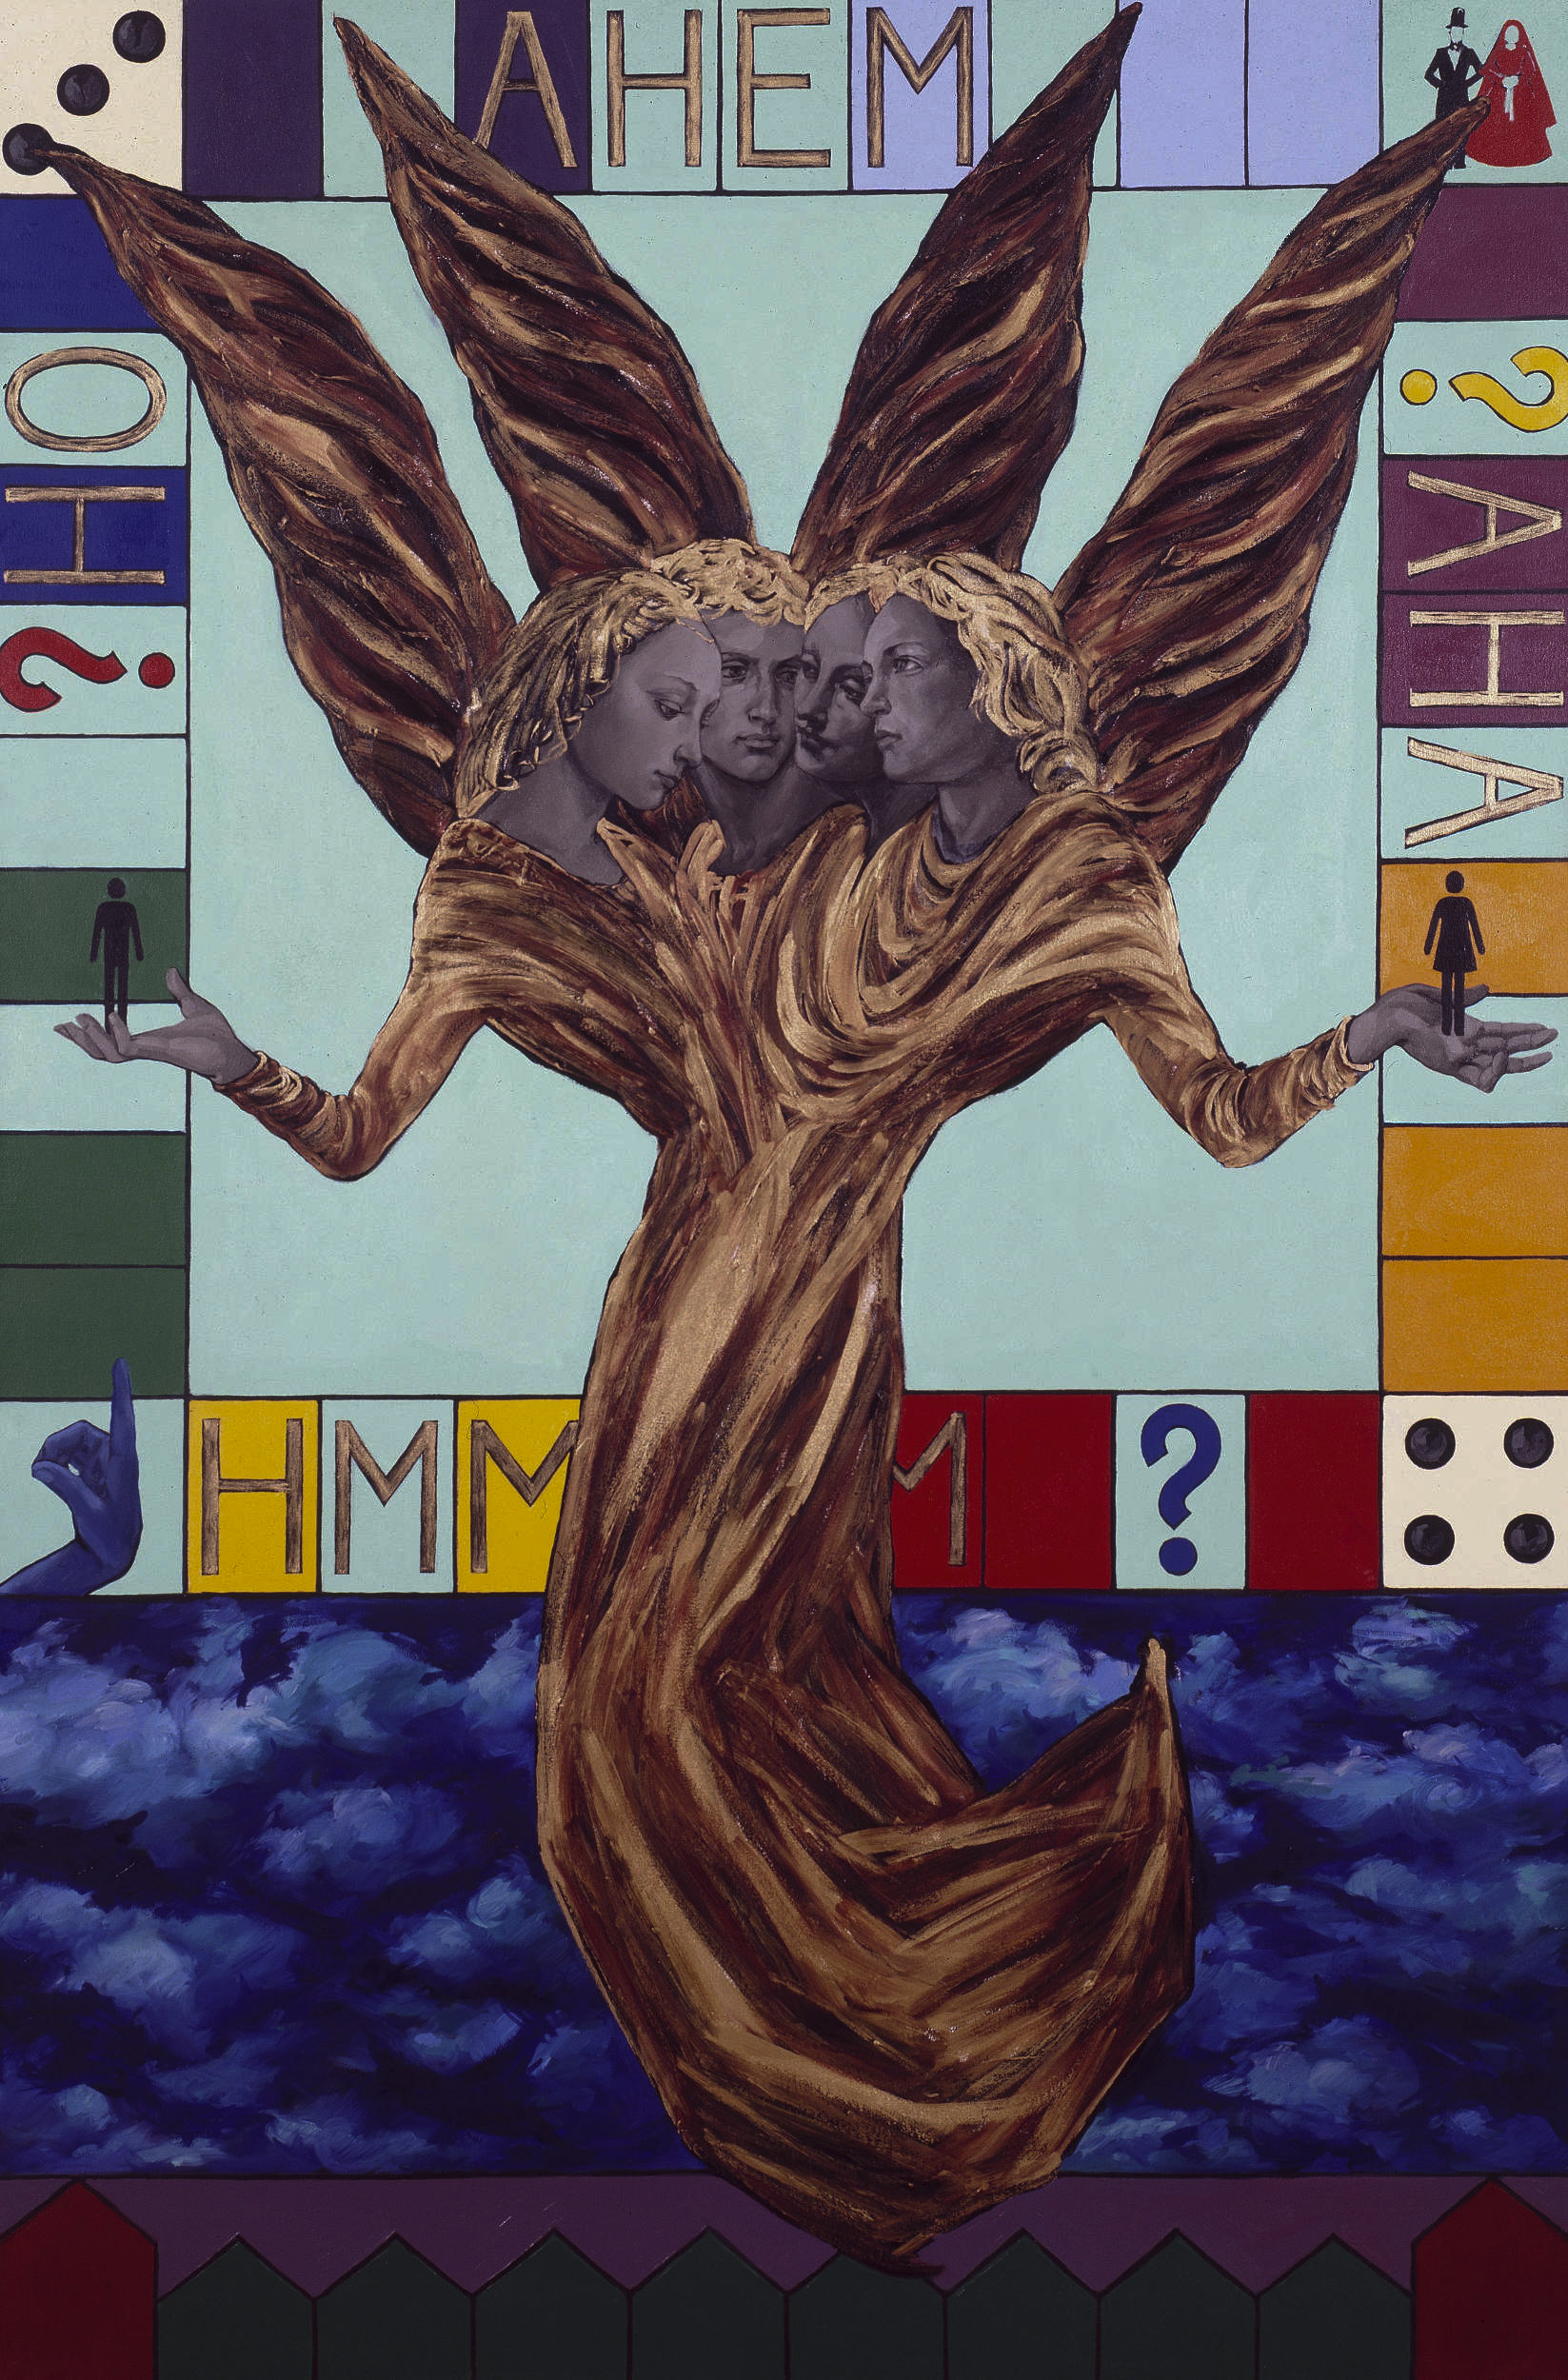 Four headed angel, gold robes, with 4 gold wings floating in front of a monopoly board with question marks and dice blue sky with clouds holding small 'man'  'woman' symbols in their hands